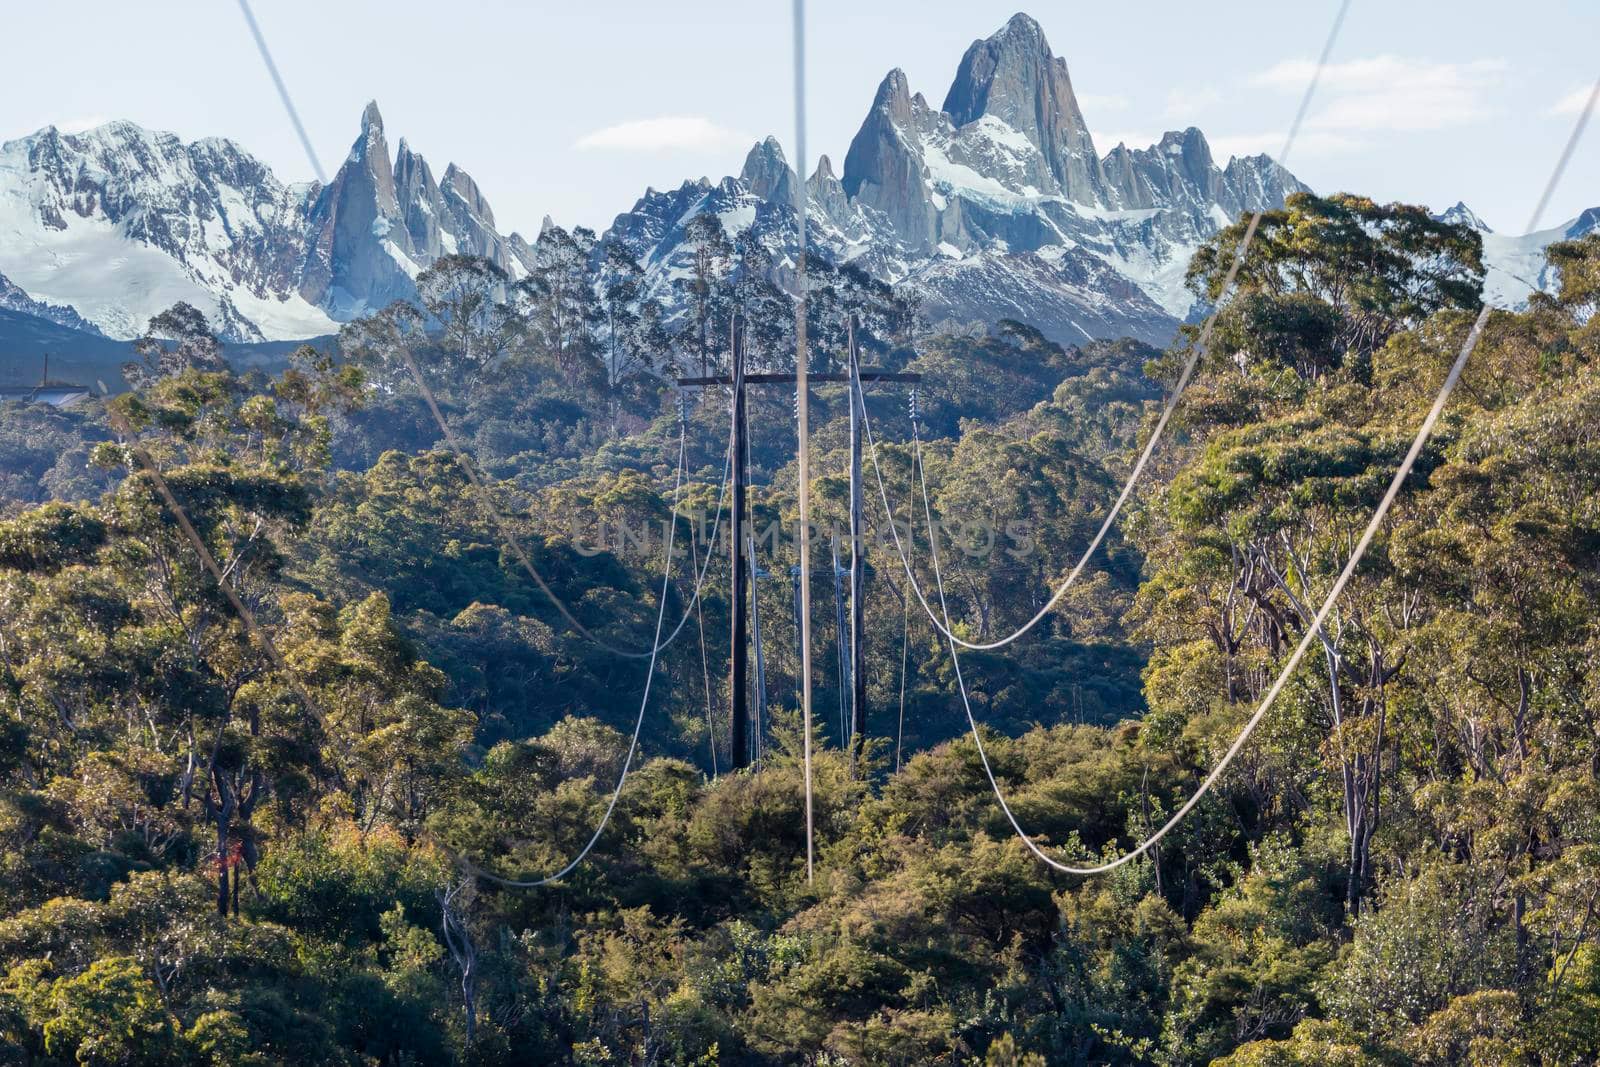 Photograph of transmission poles and lines running across a large forest canopy